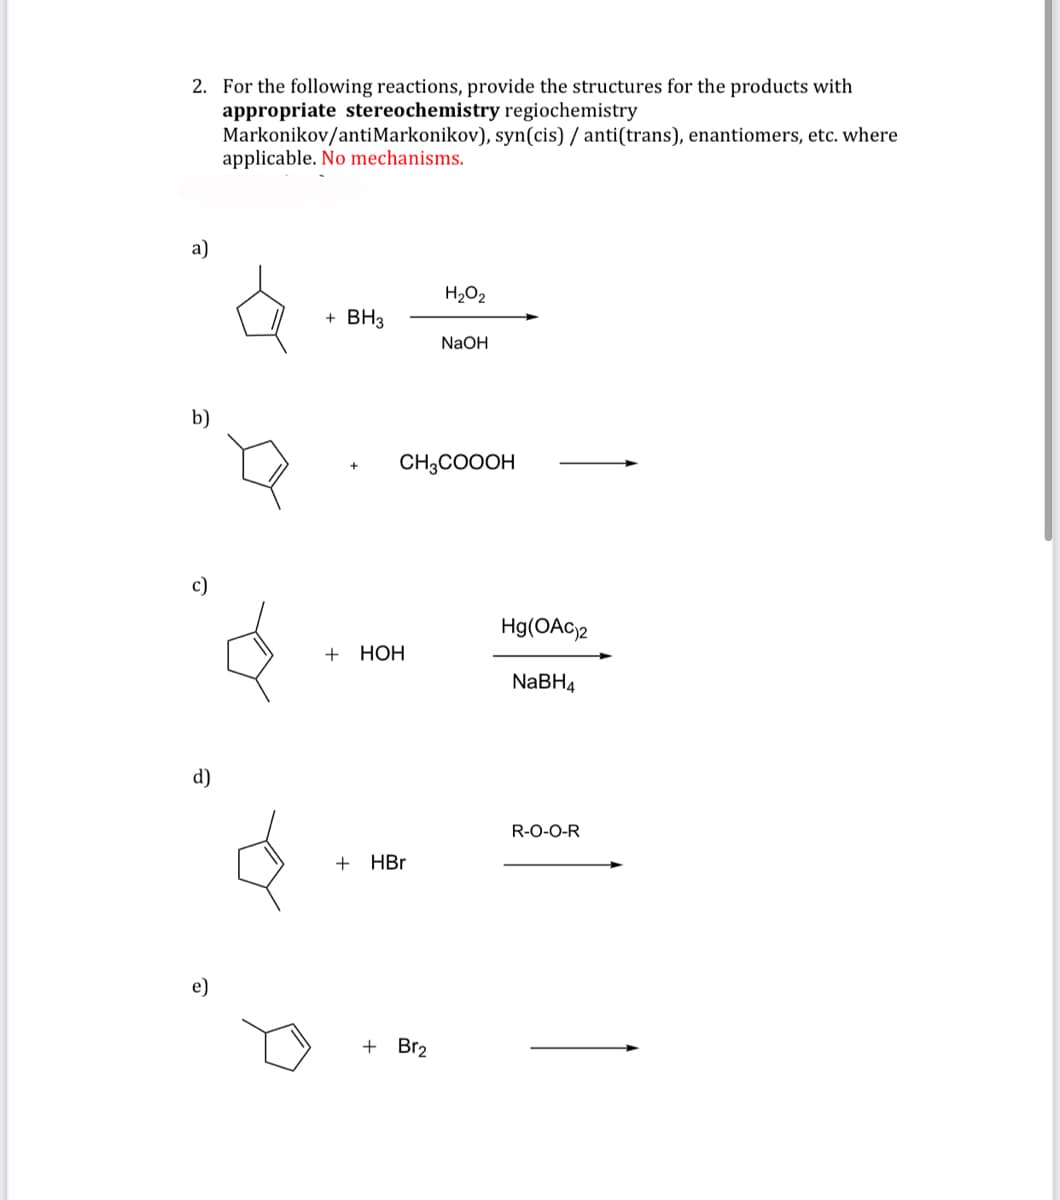 2. For the following reactions, provide the structures for the products with
appropriate stereochemistry regiochemistry
Markonikov/anti Markonikov), syn(cis) / anti(trans), enantiomers, etc. where
applicable. No mechanisms.
a)
b)
c)
d)
+ BH3
+ HOH
CH3COOOH
+ HBr
H₂O₂
+ Br₂
NaOH
Hg(OAC)2
NaBH4
R-O-O-R